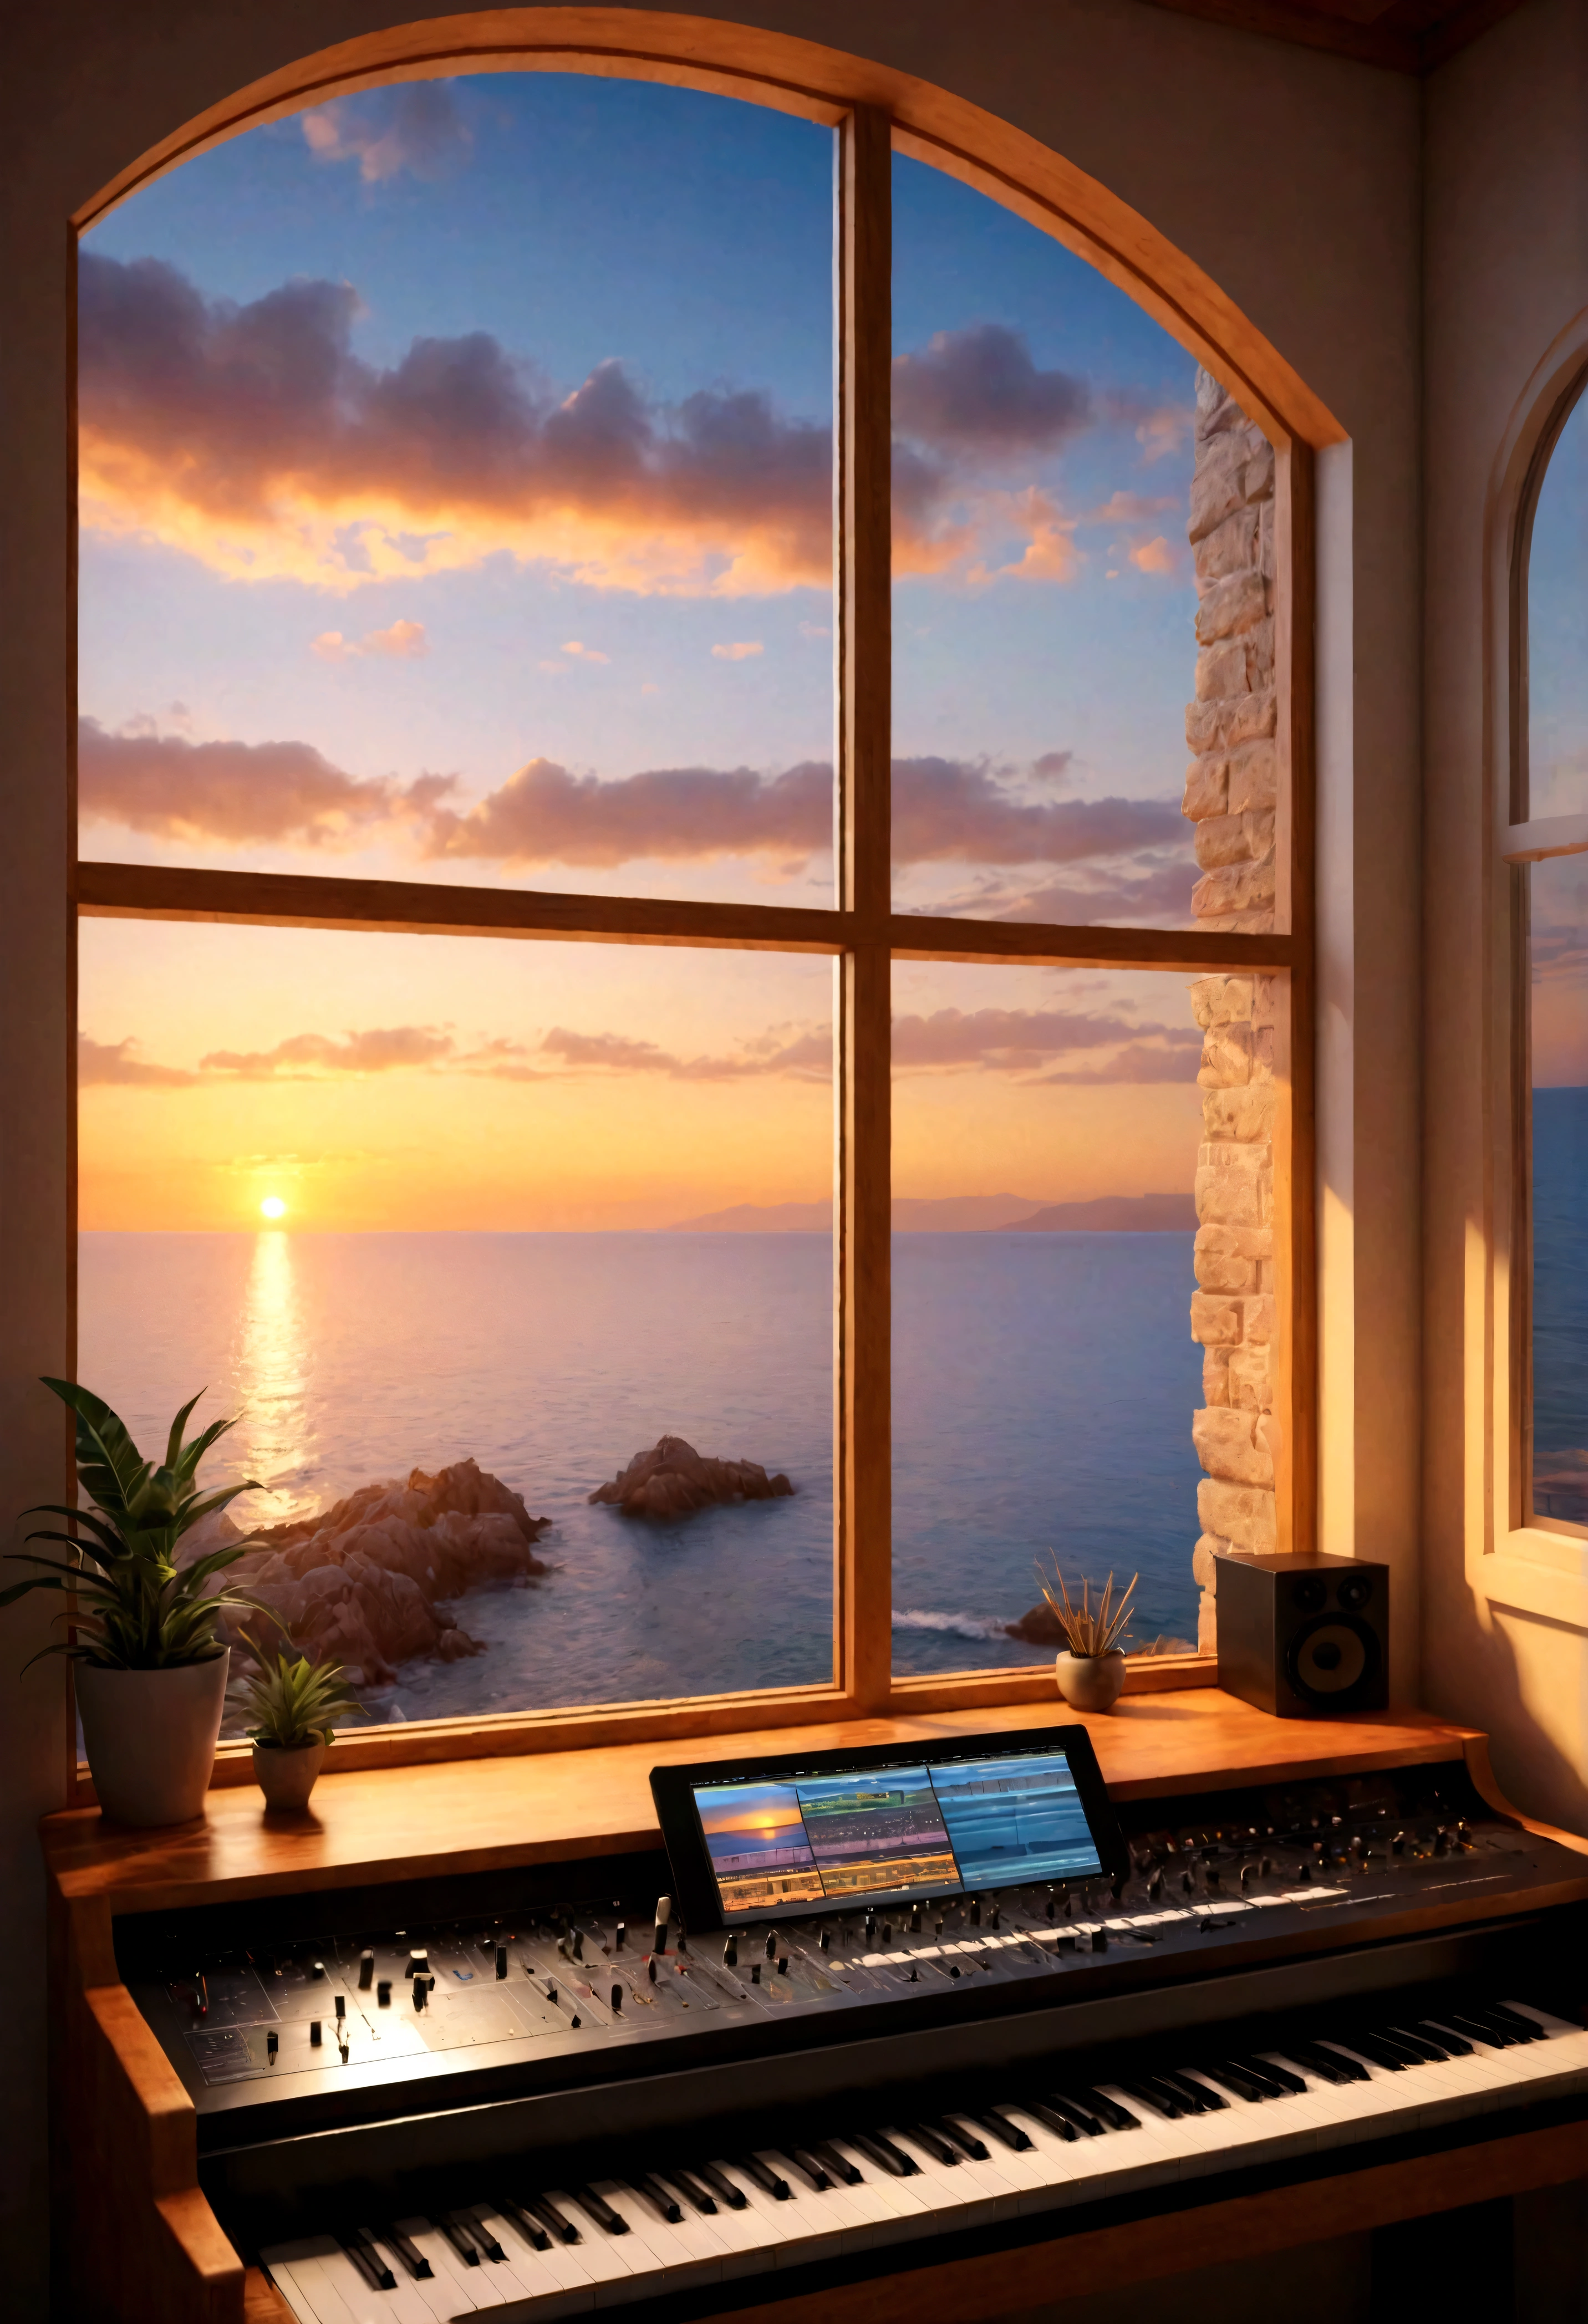 music studio with a seaside view through window,sunset,8k,masterpiece,perfect composition